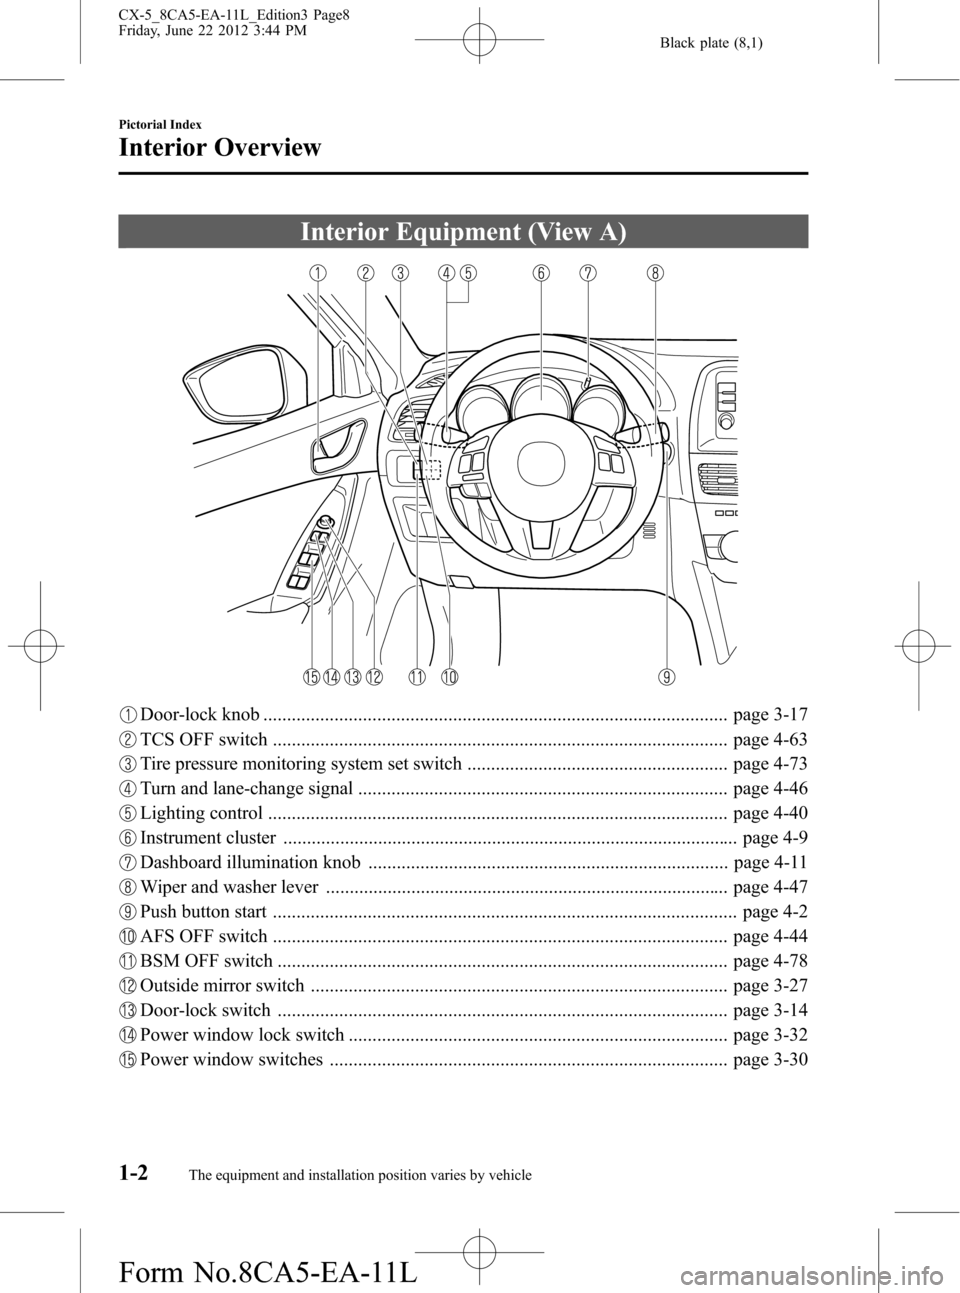 MAZDA MODEL CX-5 2013  Owners Manual (in English) Black plate (8,1)
Interior Equipment (View A)
Door-lock knob .................................................................................................. page 3-17
TCS OFF switch ...............